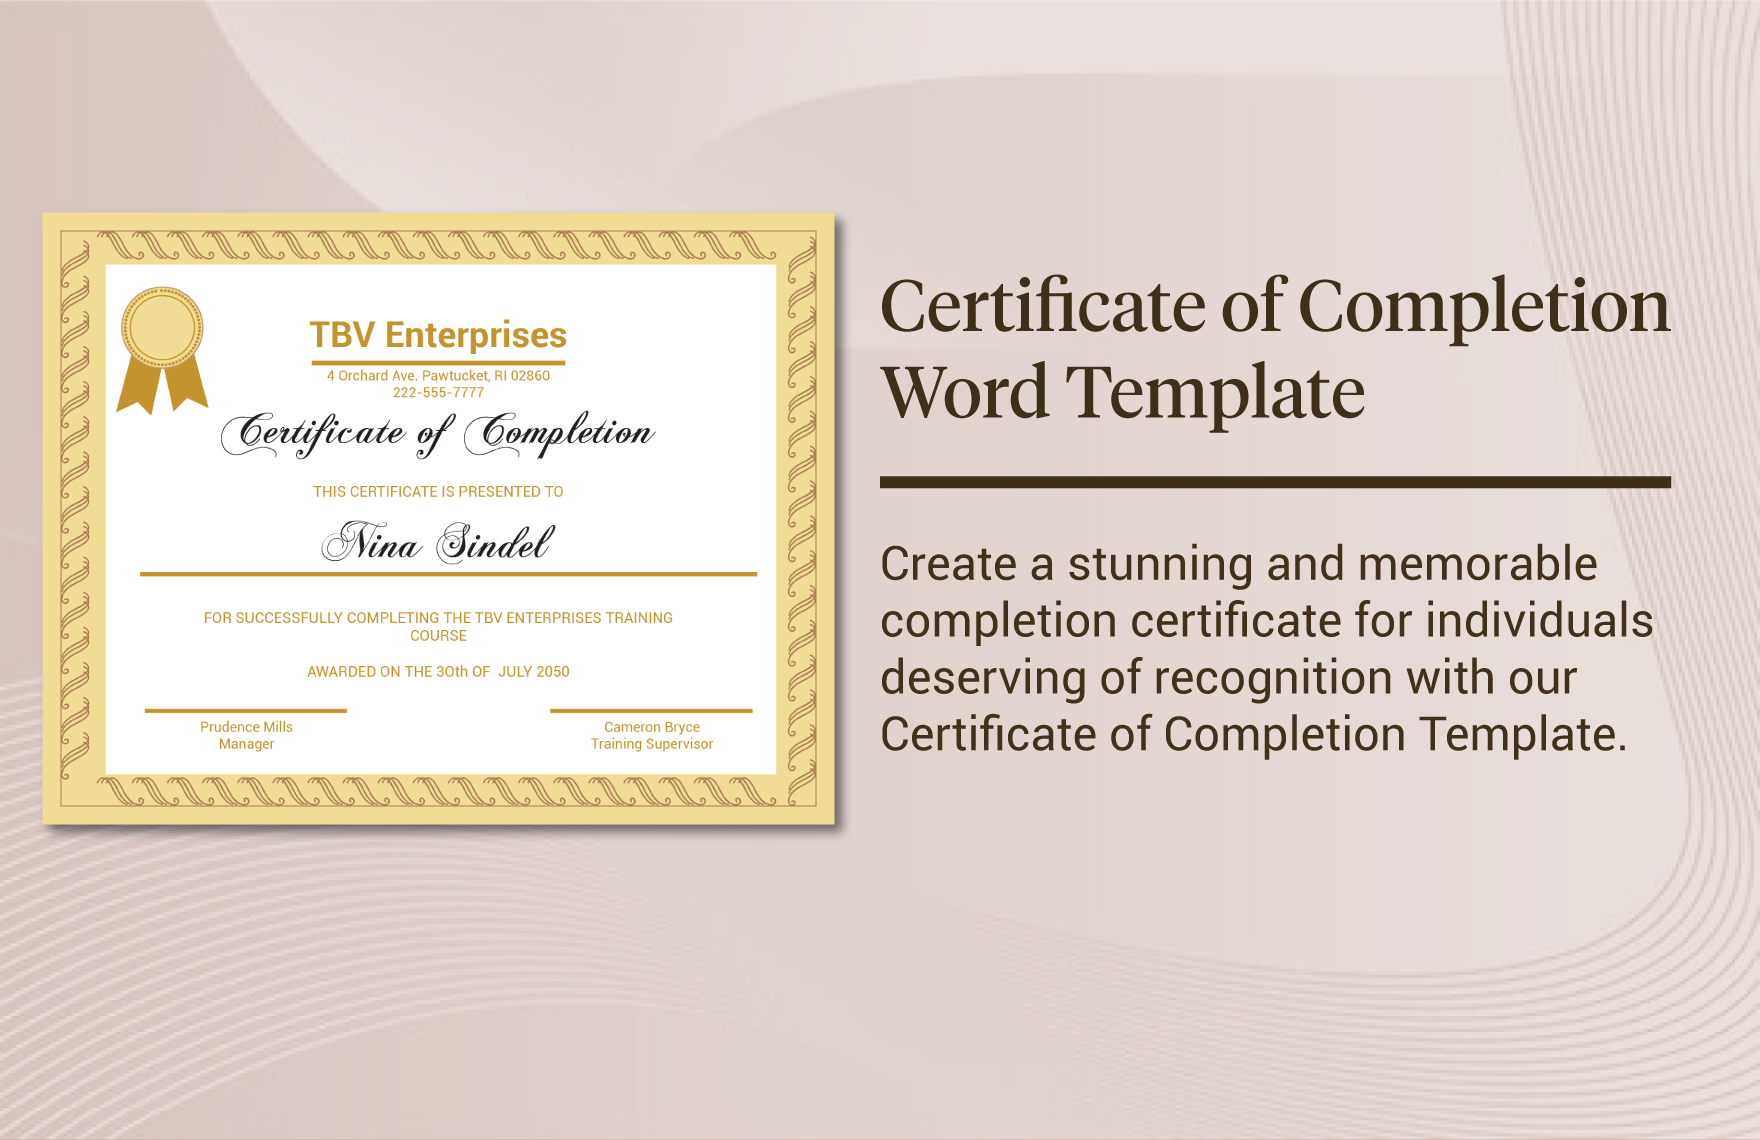 Certificate of Completion Word Template